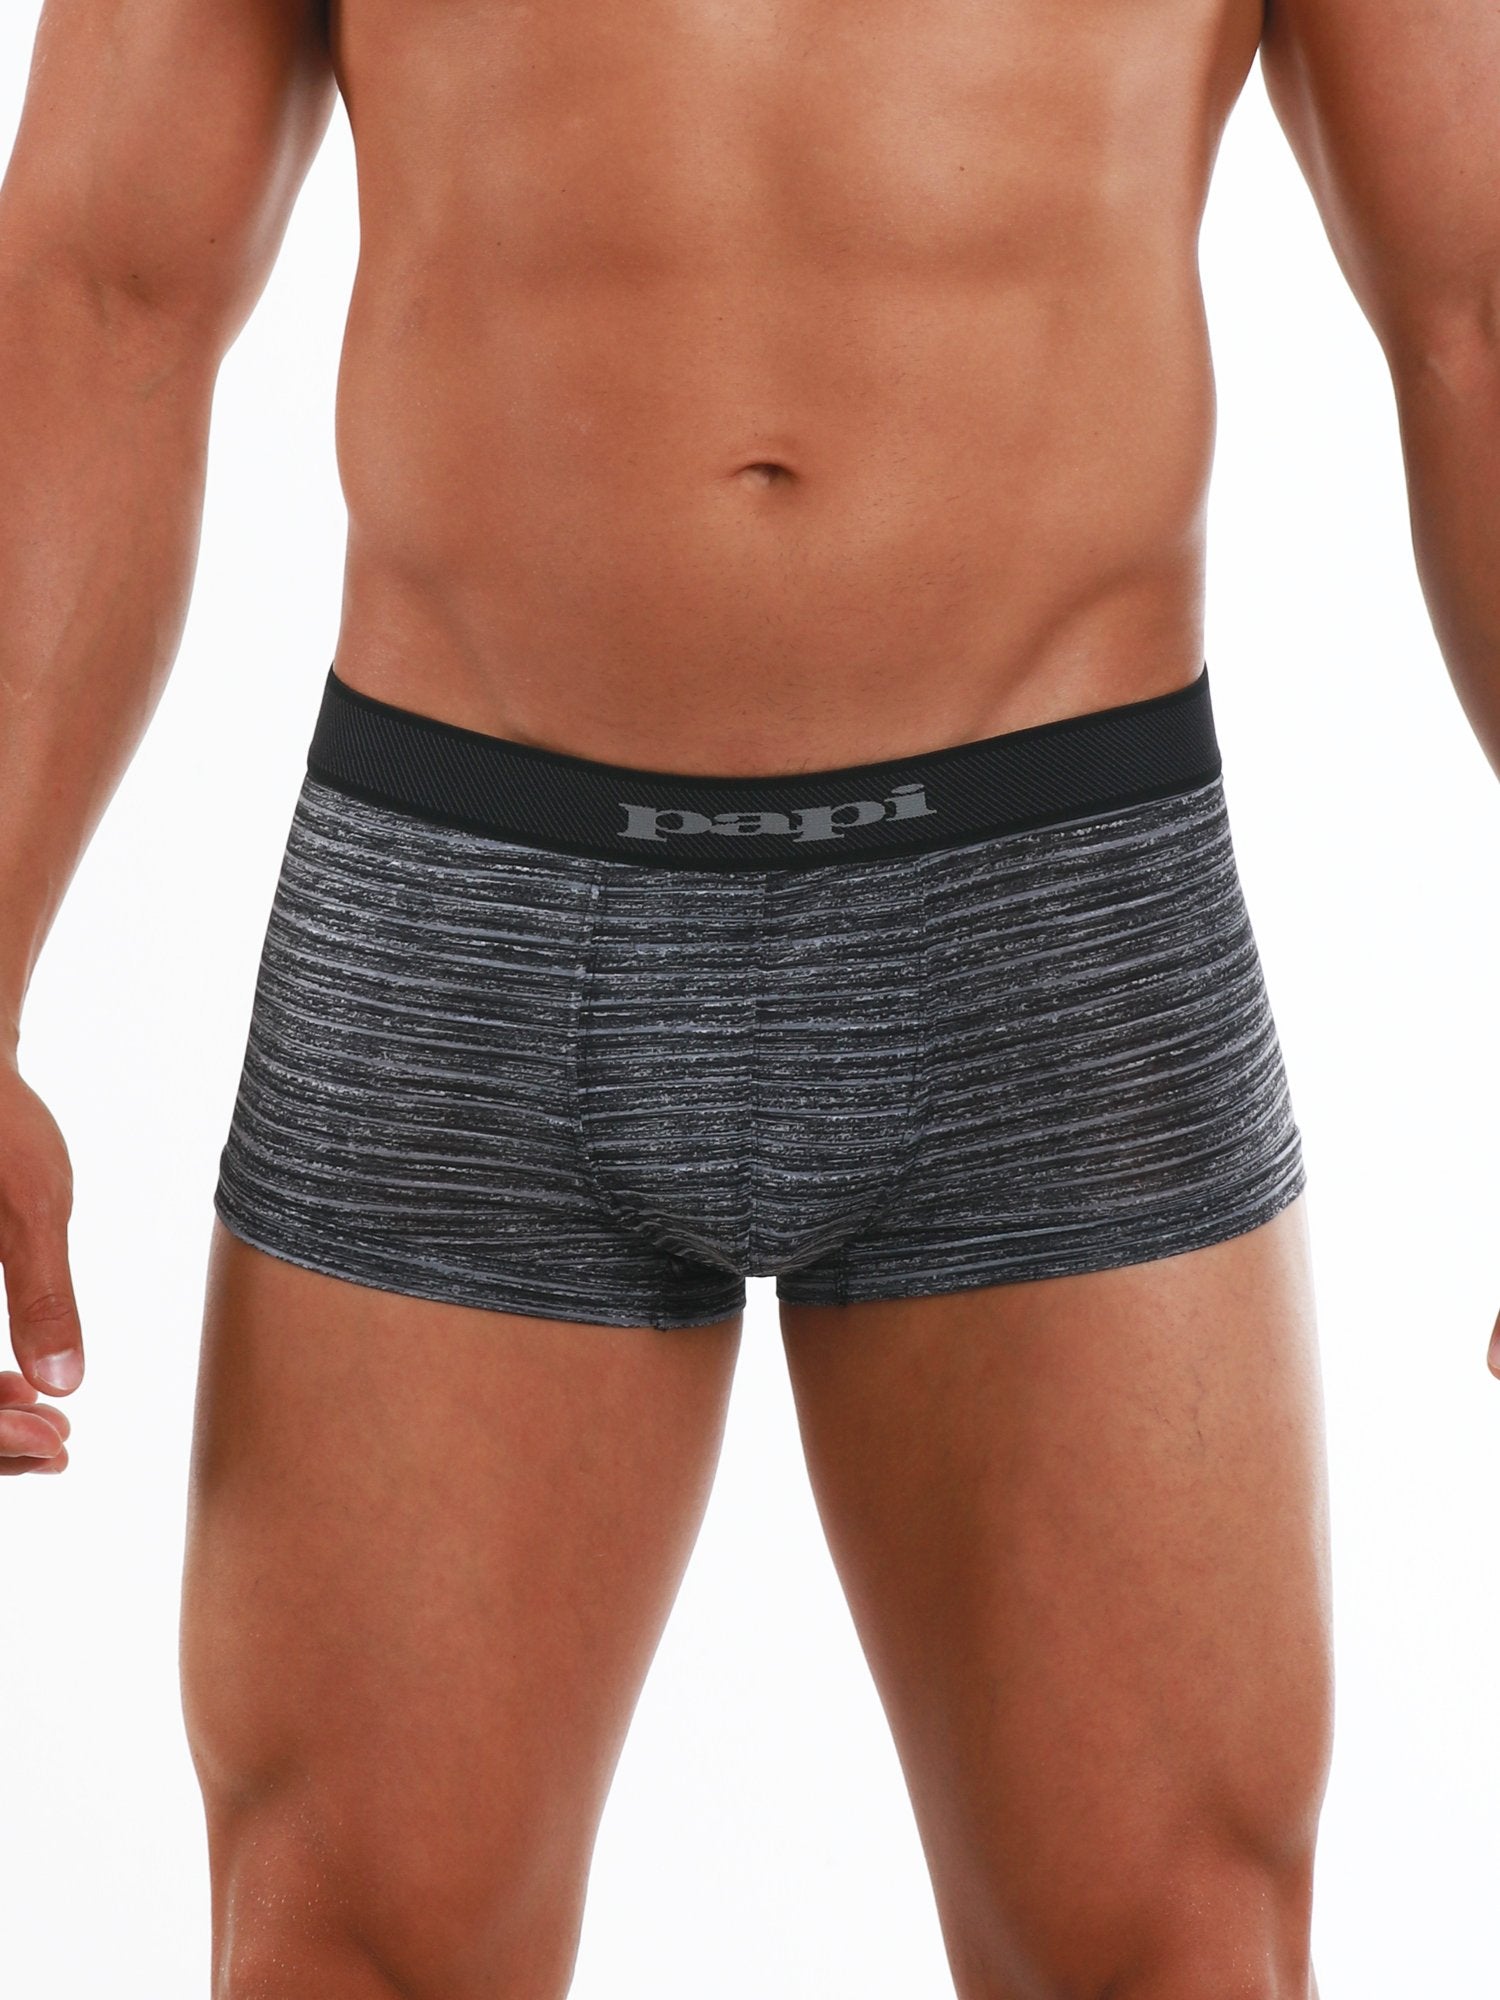 Items on sale excluded – Page 2 – Papi Underwear